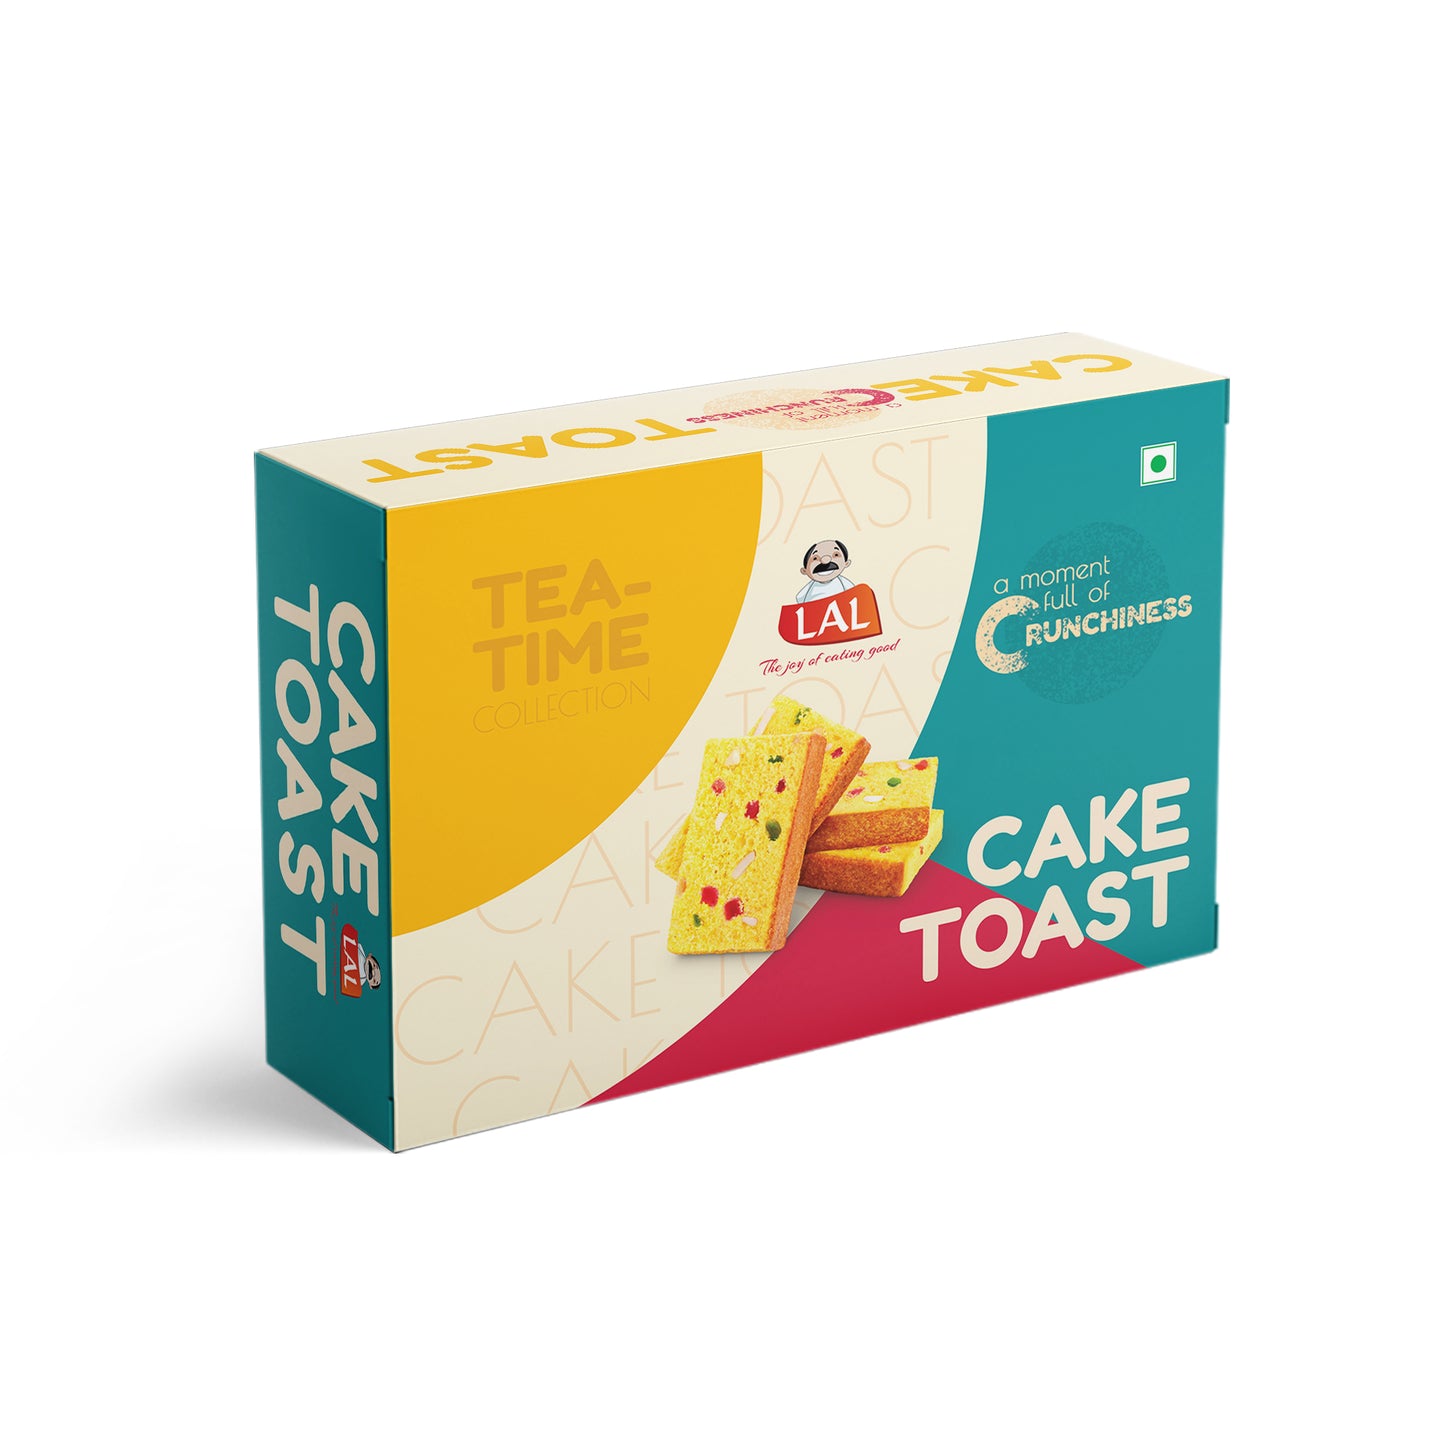 Lal Sweets Cake Toast - 300g